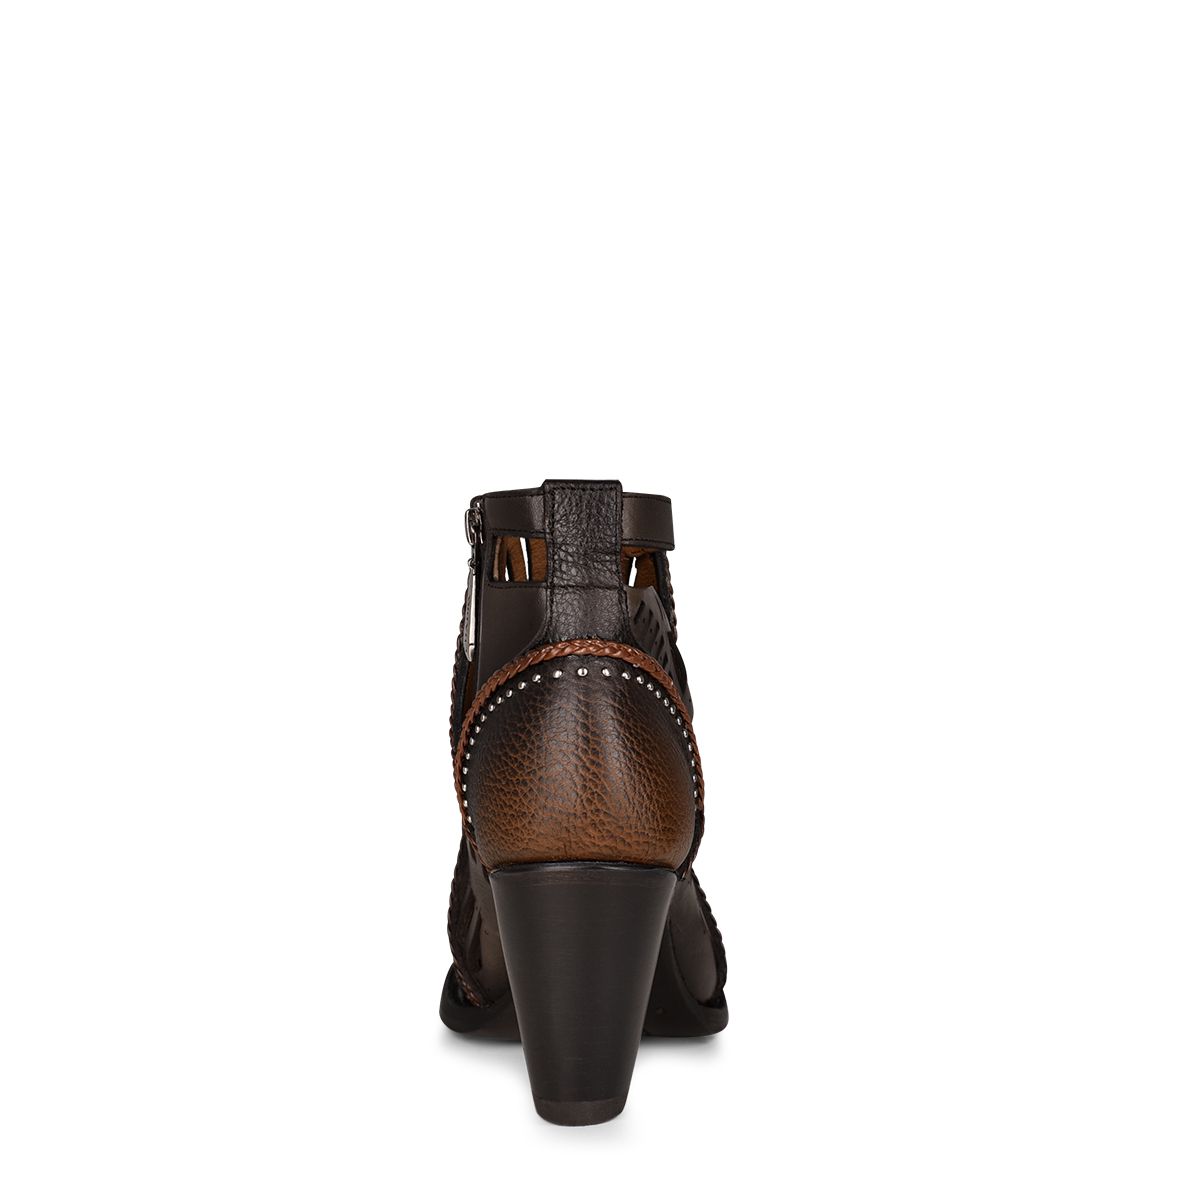 4I07RS - Cuadra honey summer casual leather ankle booties for women-CUADRA-Kuet-Cuadra-Boots